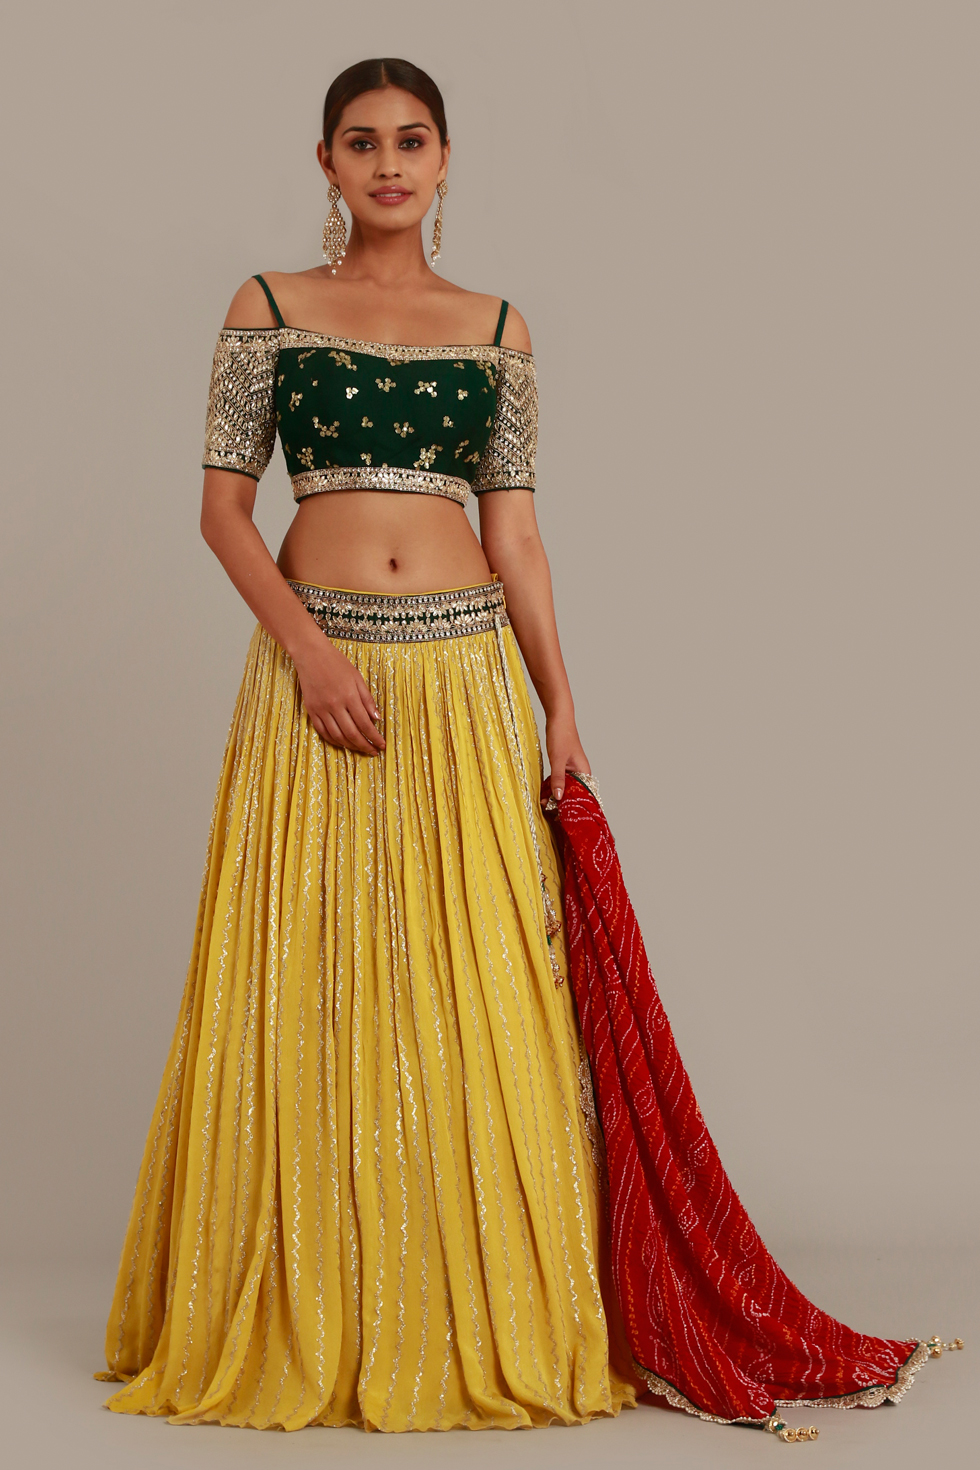 Discover 83+ green lehenga with yellow blouse - POPPY